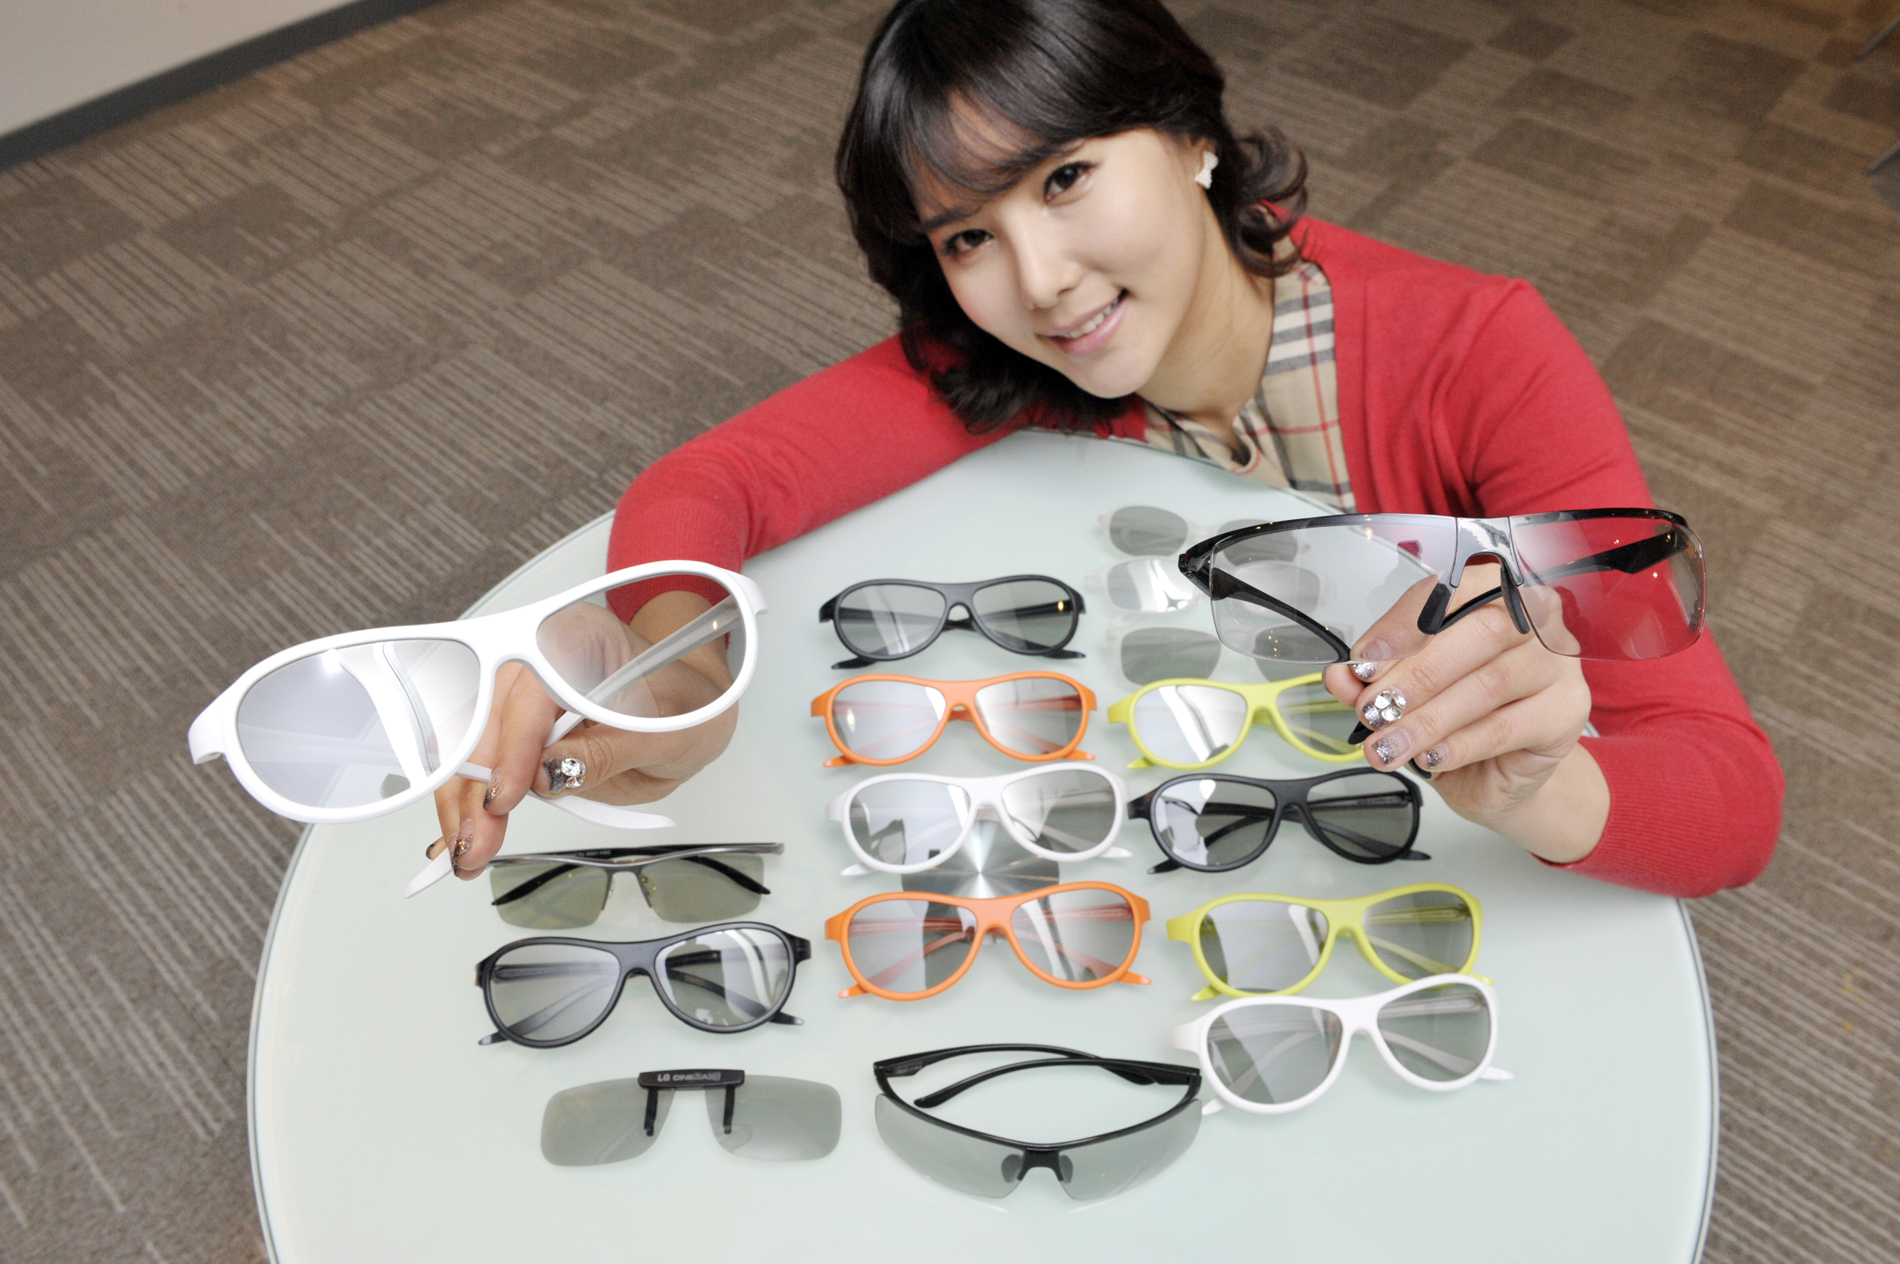 A model presenting the various types and colors of LG’s new 3D glasses lineup on a table